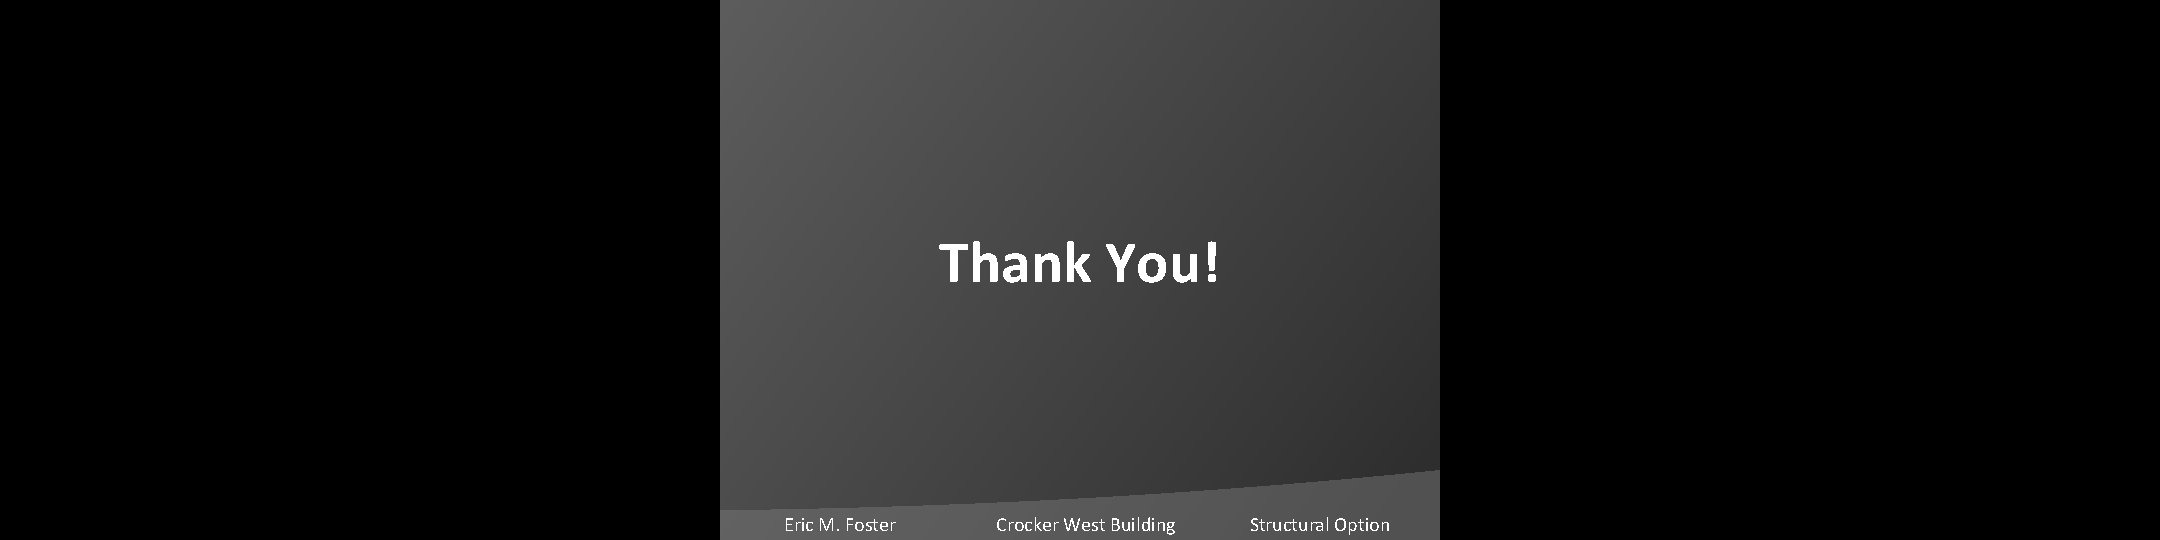 Thank You! Eric M. Foster Crocker West Building Structural Option 